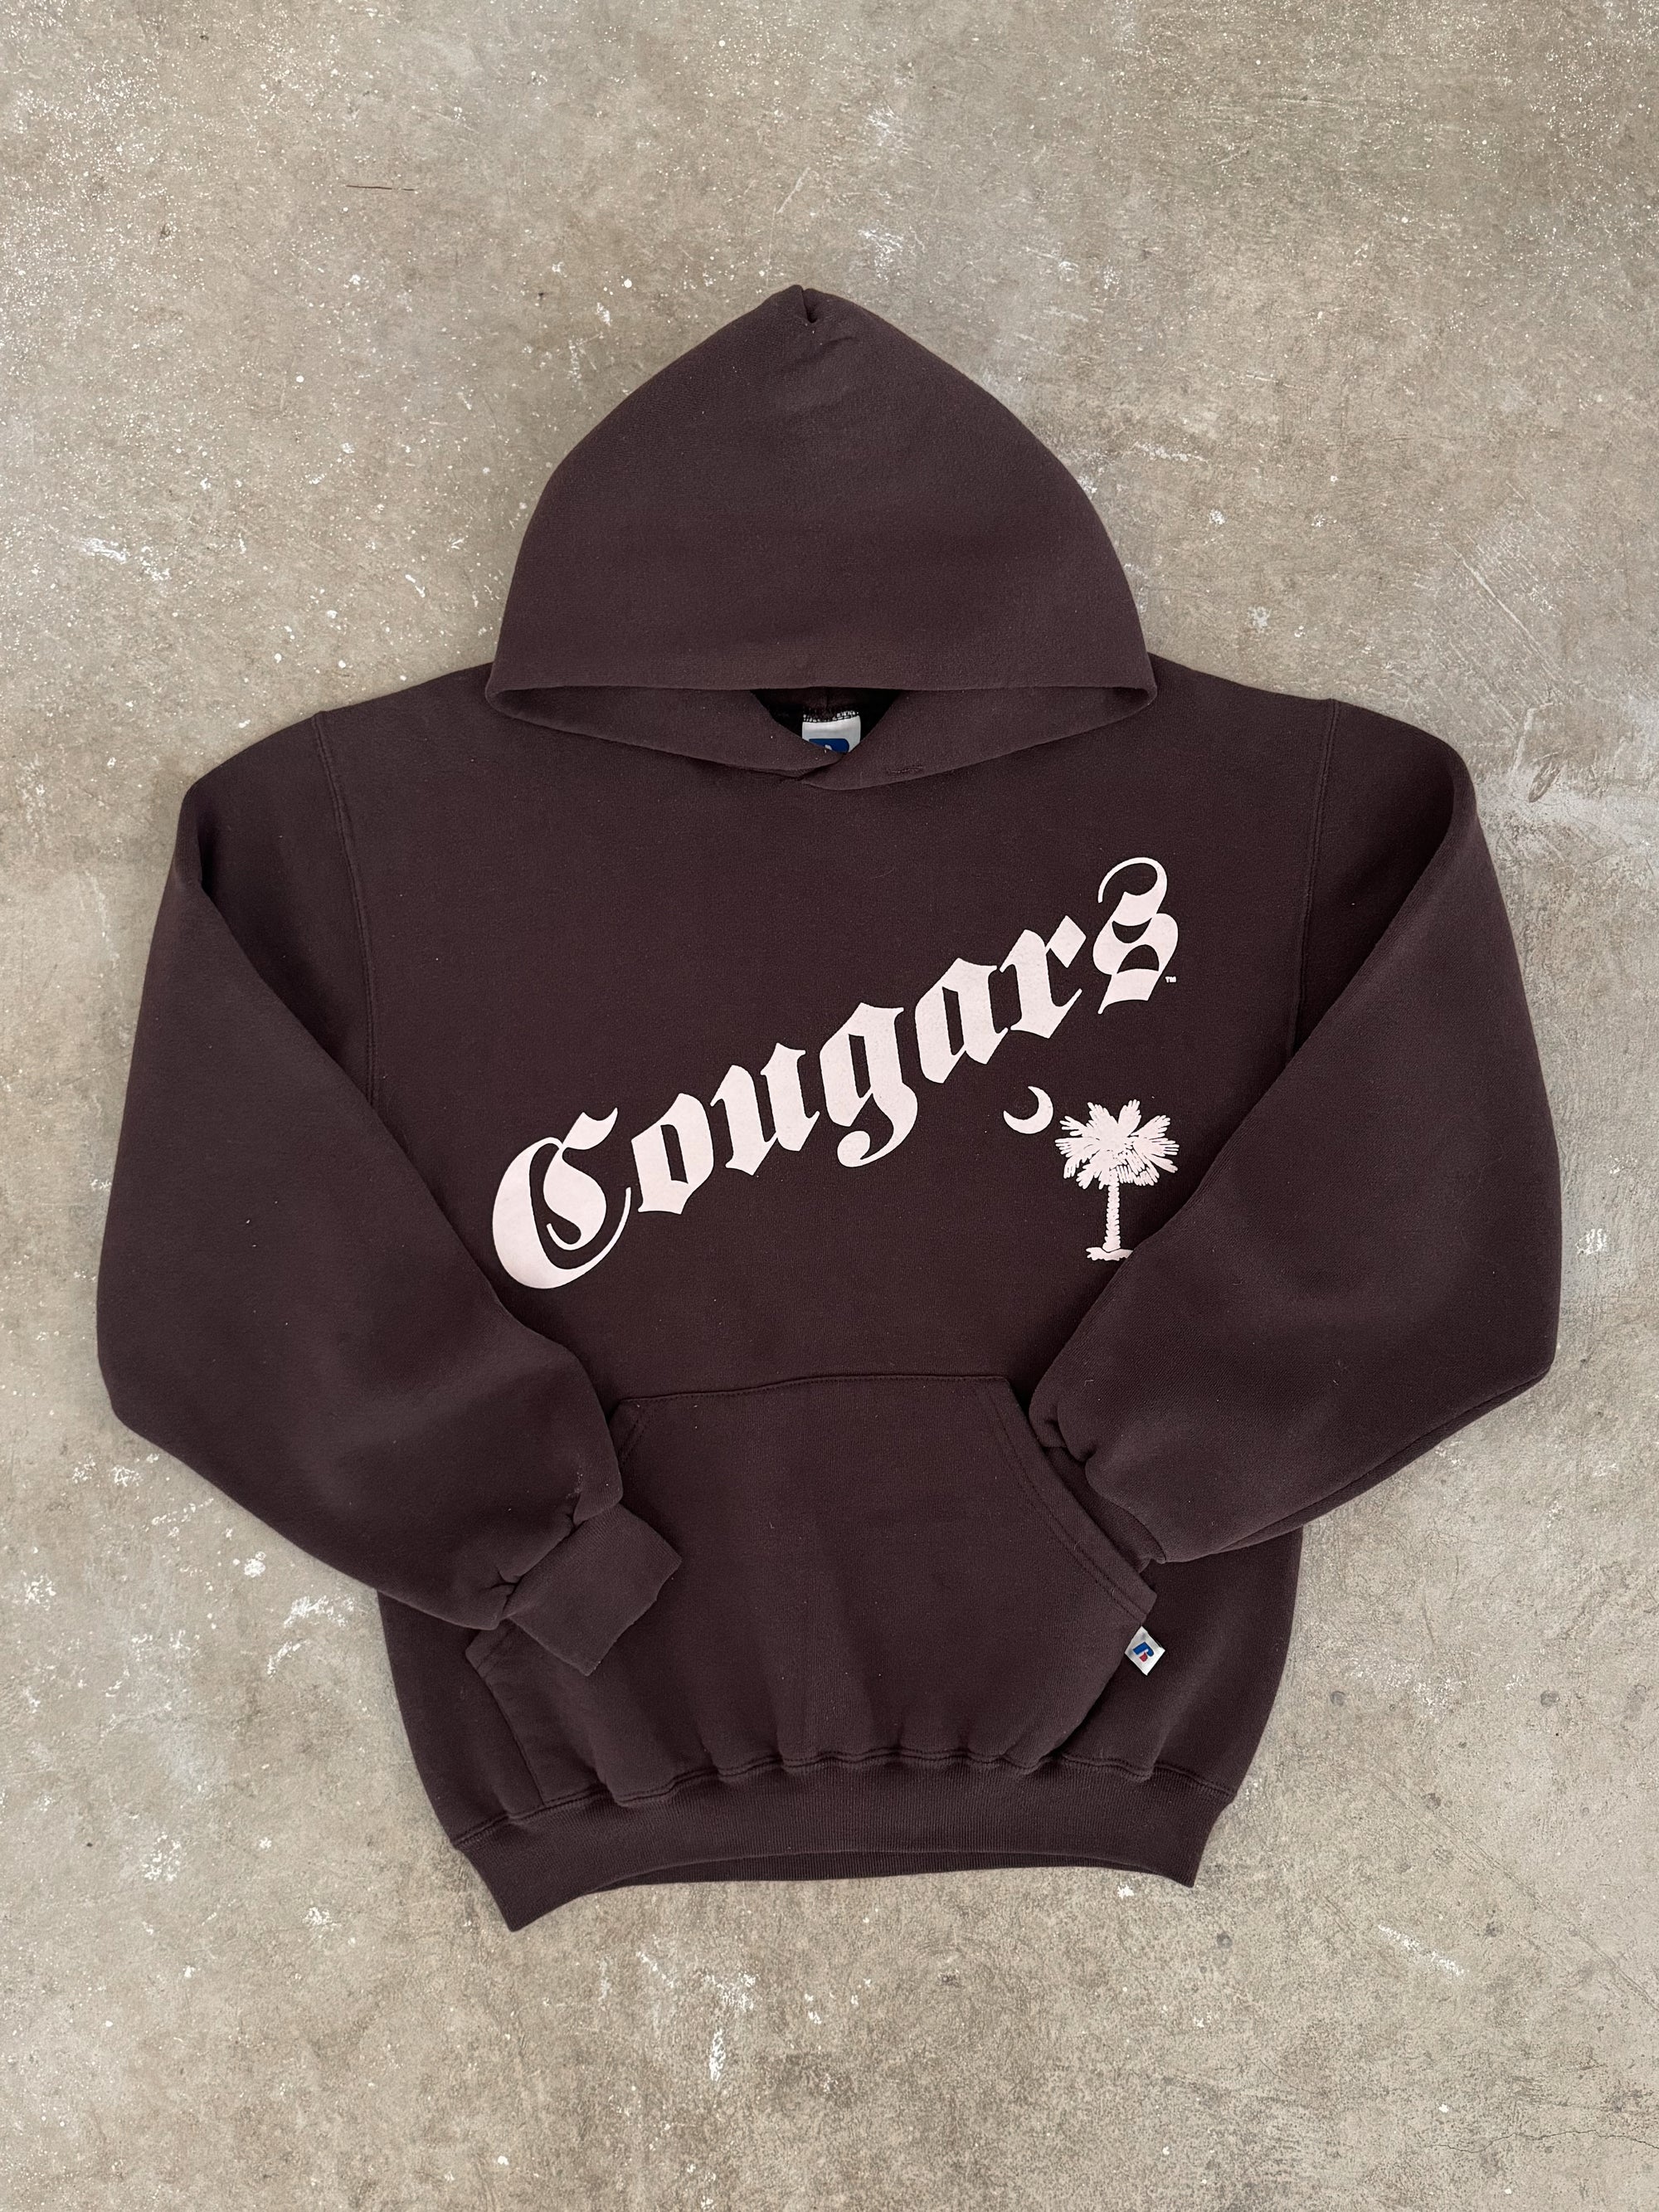 Early 00s Russell "Cougars" Hoodie (S)